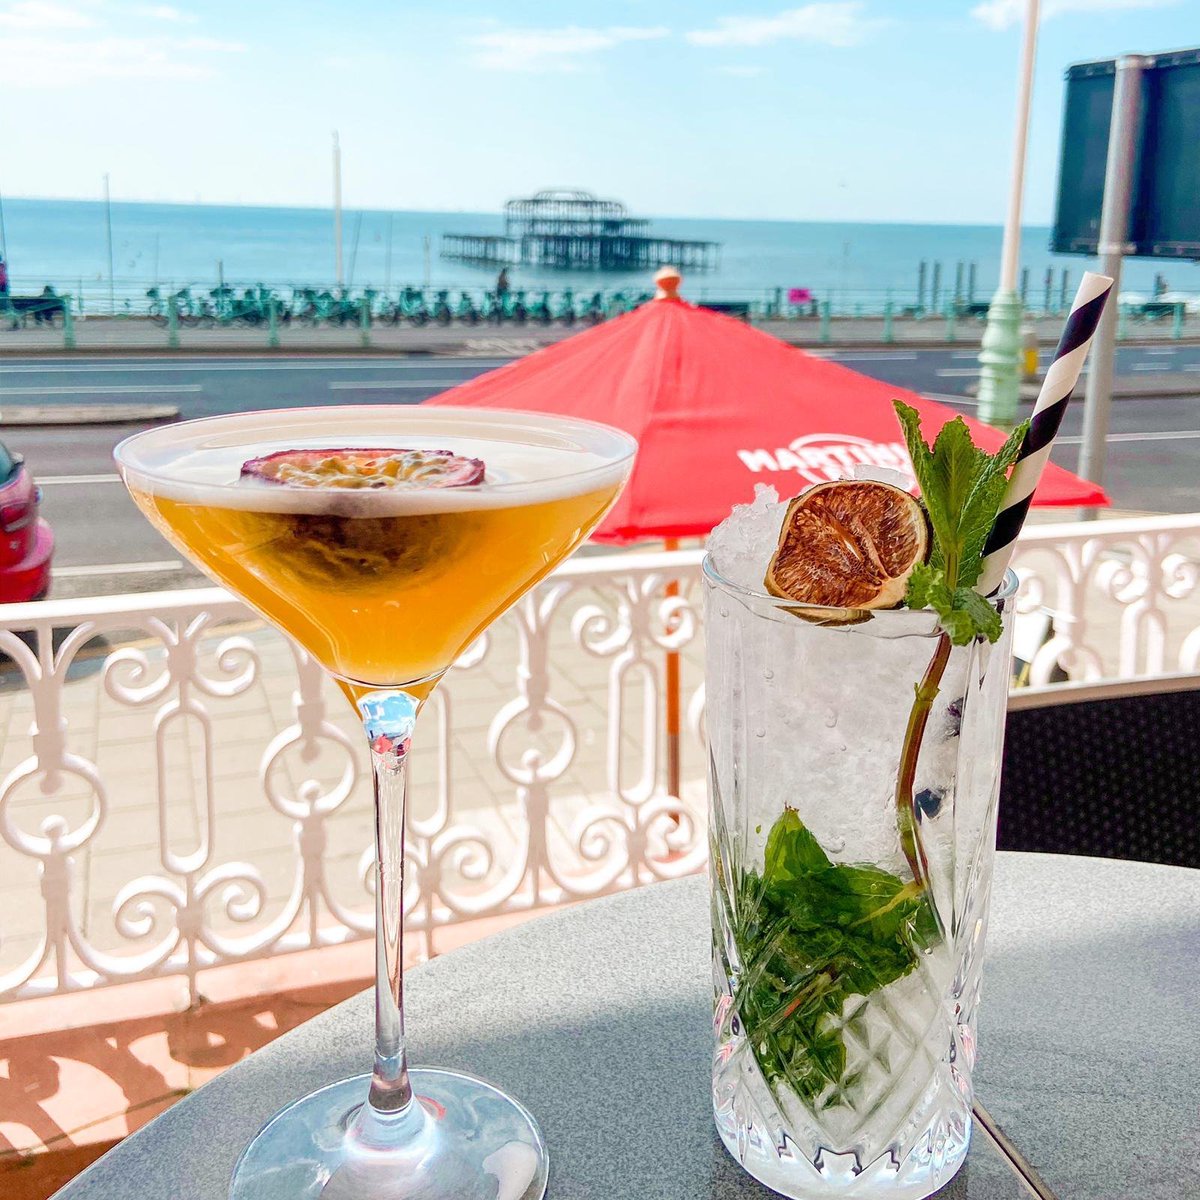 Make the most of the sunshine ☀️ and pop into the Metropole Bar for a chilled after work drink on the terrace. We have ice cold beer, cocktails or an array of wines. Cheers 🍻 #summertime #alfrescodining